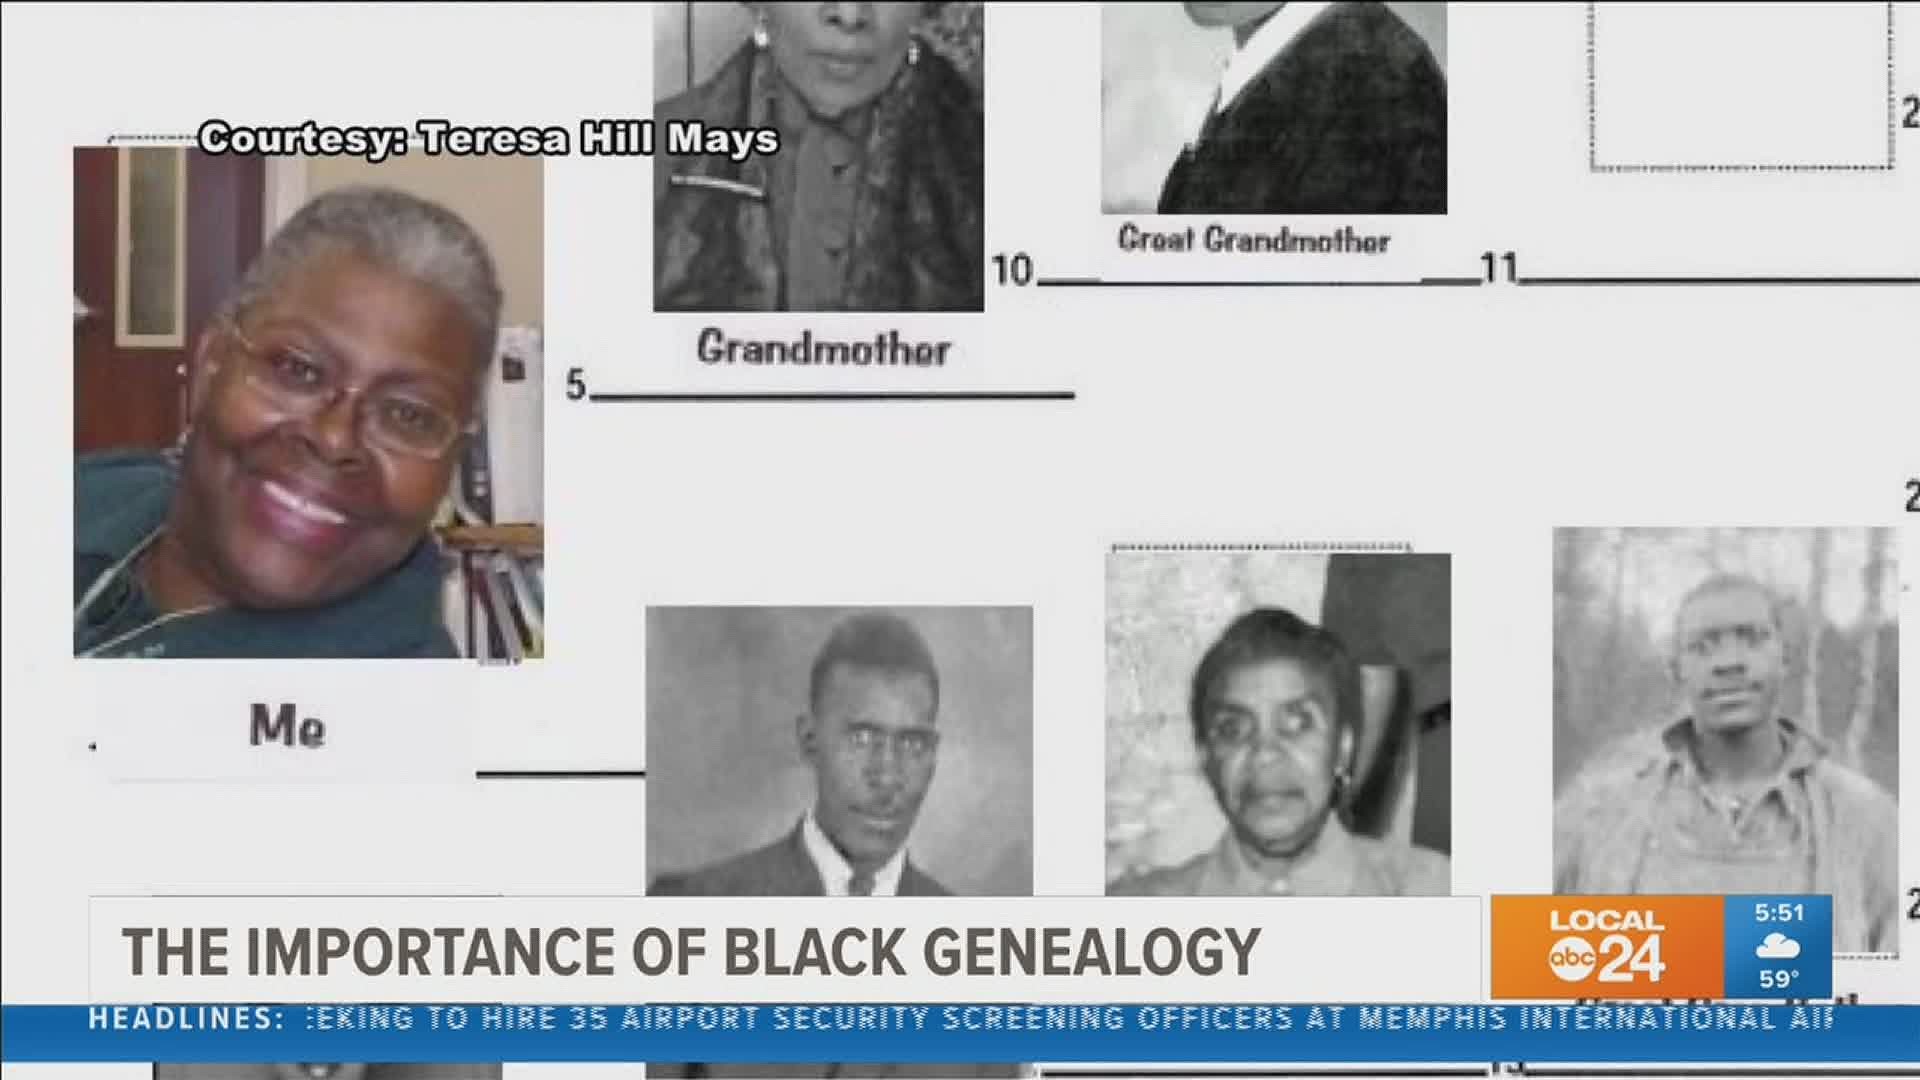 Slavery and lack of documents have kept many Black Americans from knowing their family’s full story. But the Black Genealogy movement is working to change that.